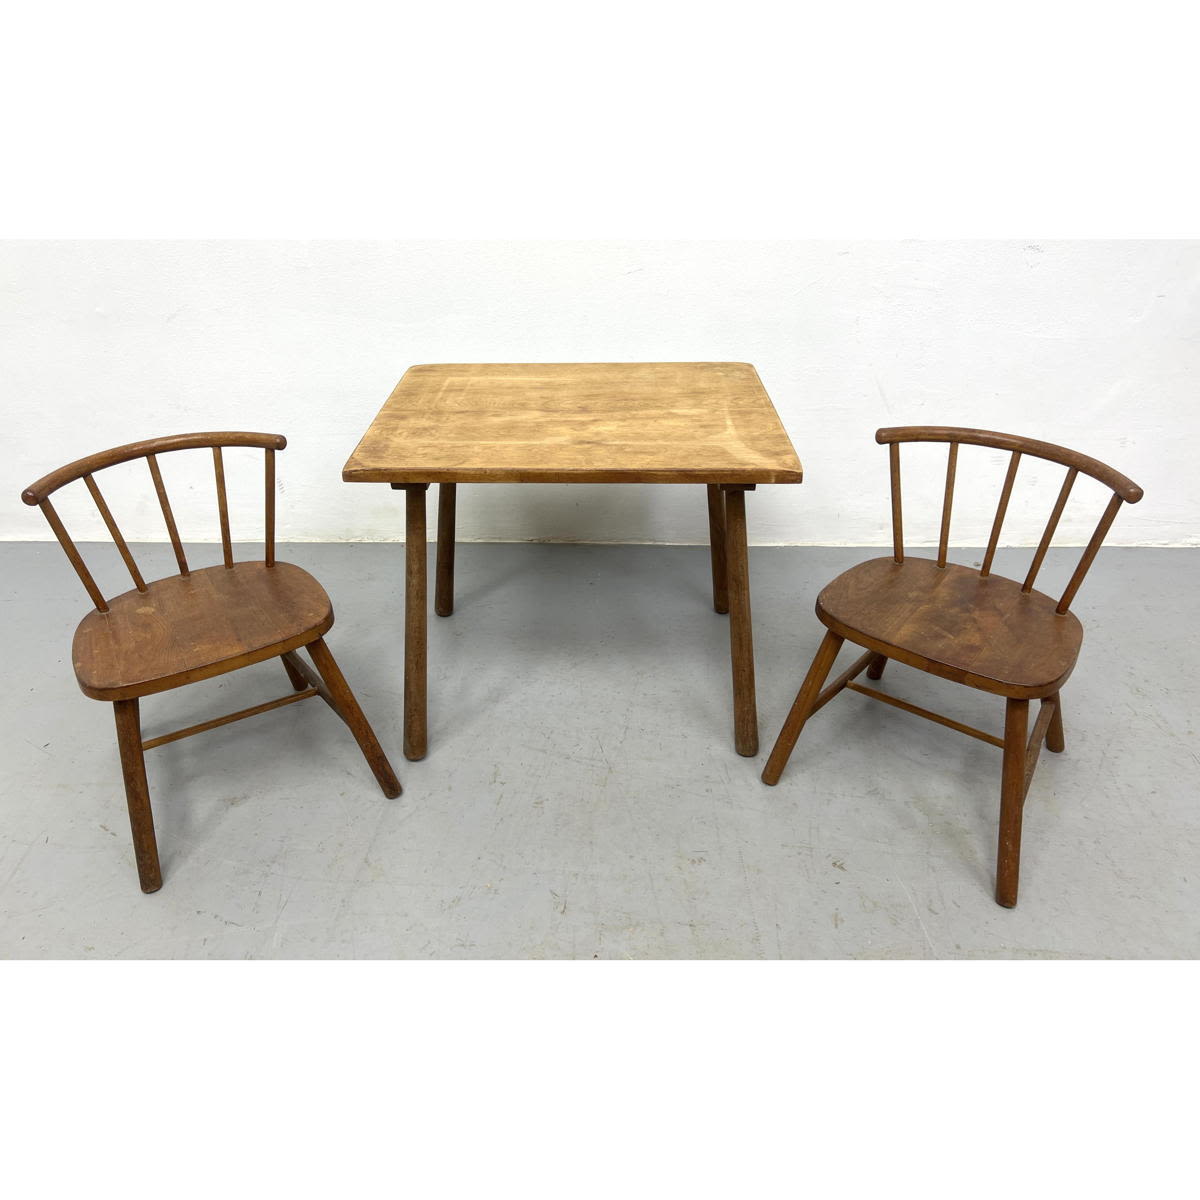 Pine Child's Set. Table and 2 Chairs.